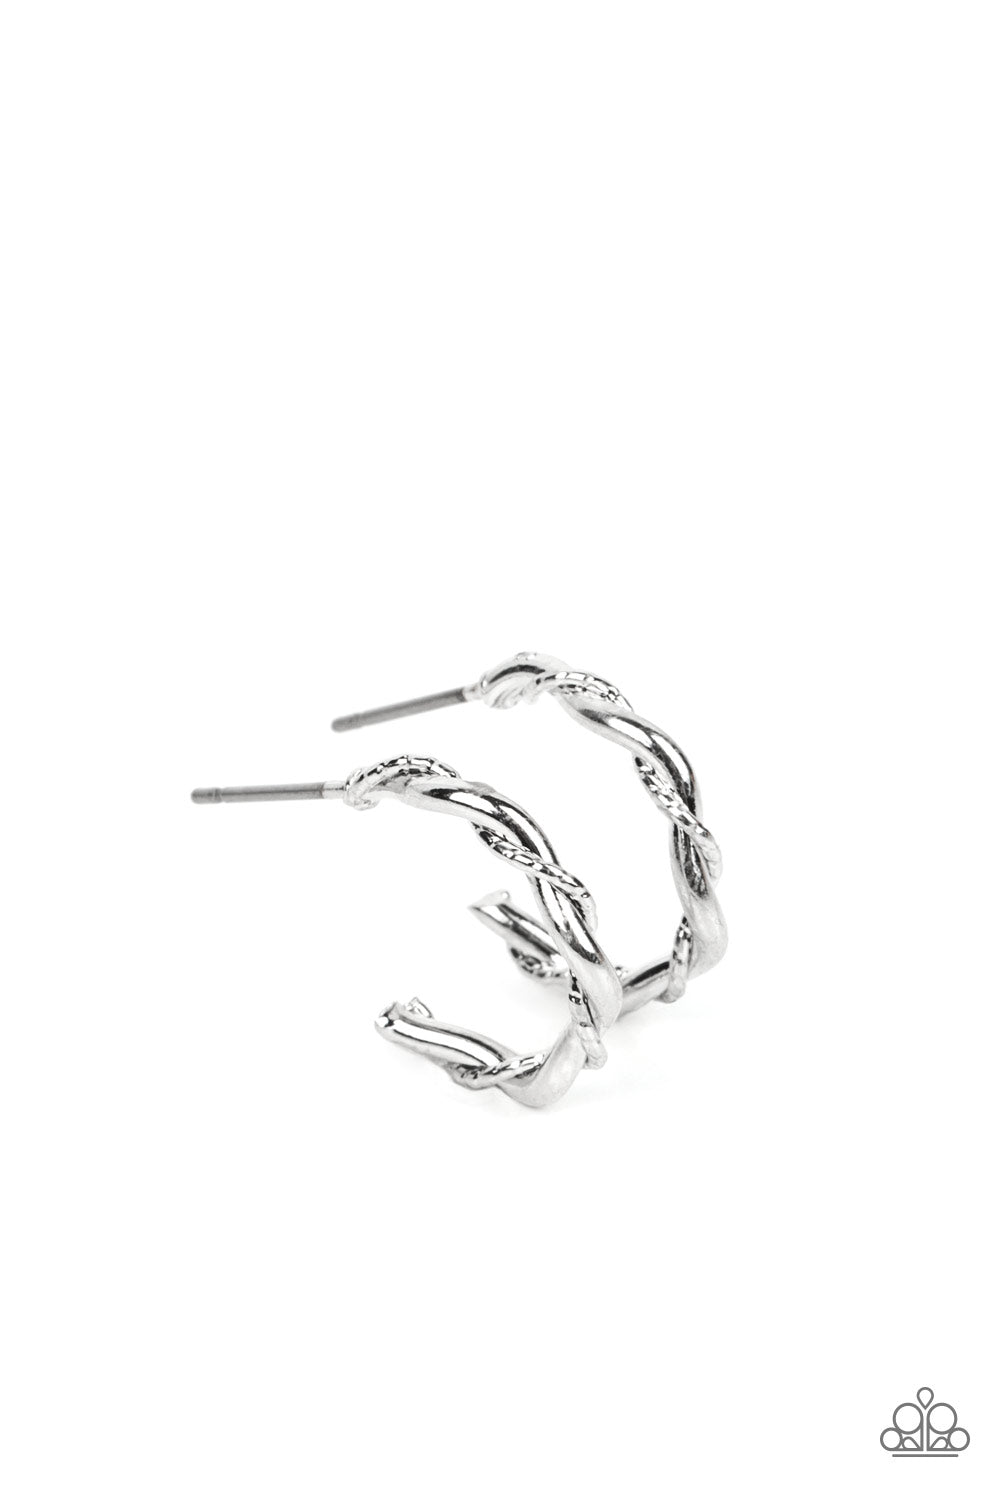 Paparazzi Accessories Irresistibly Intertwined - Silver